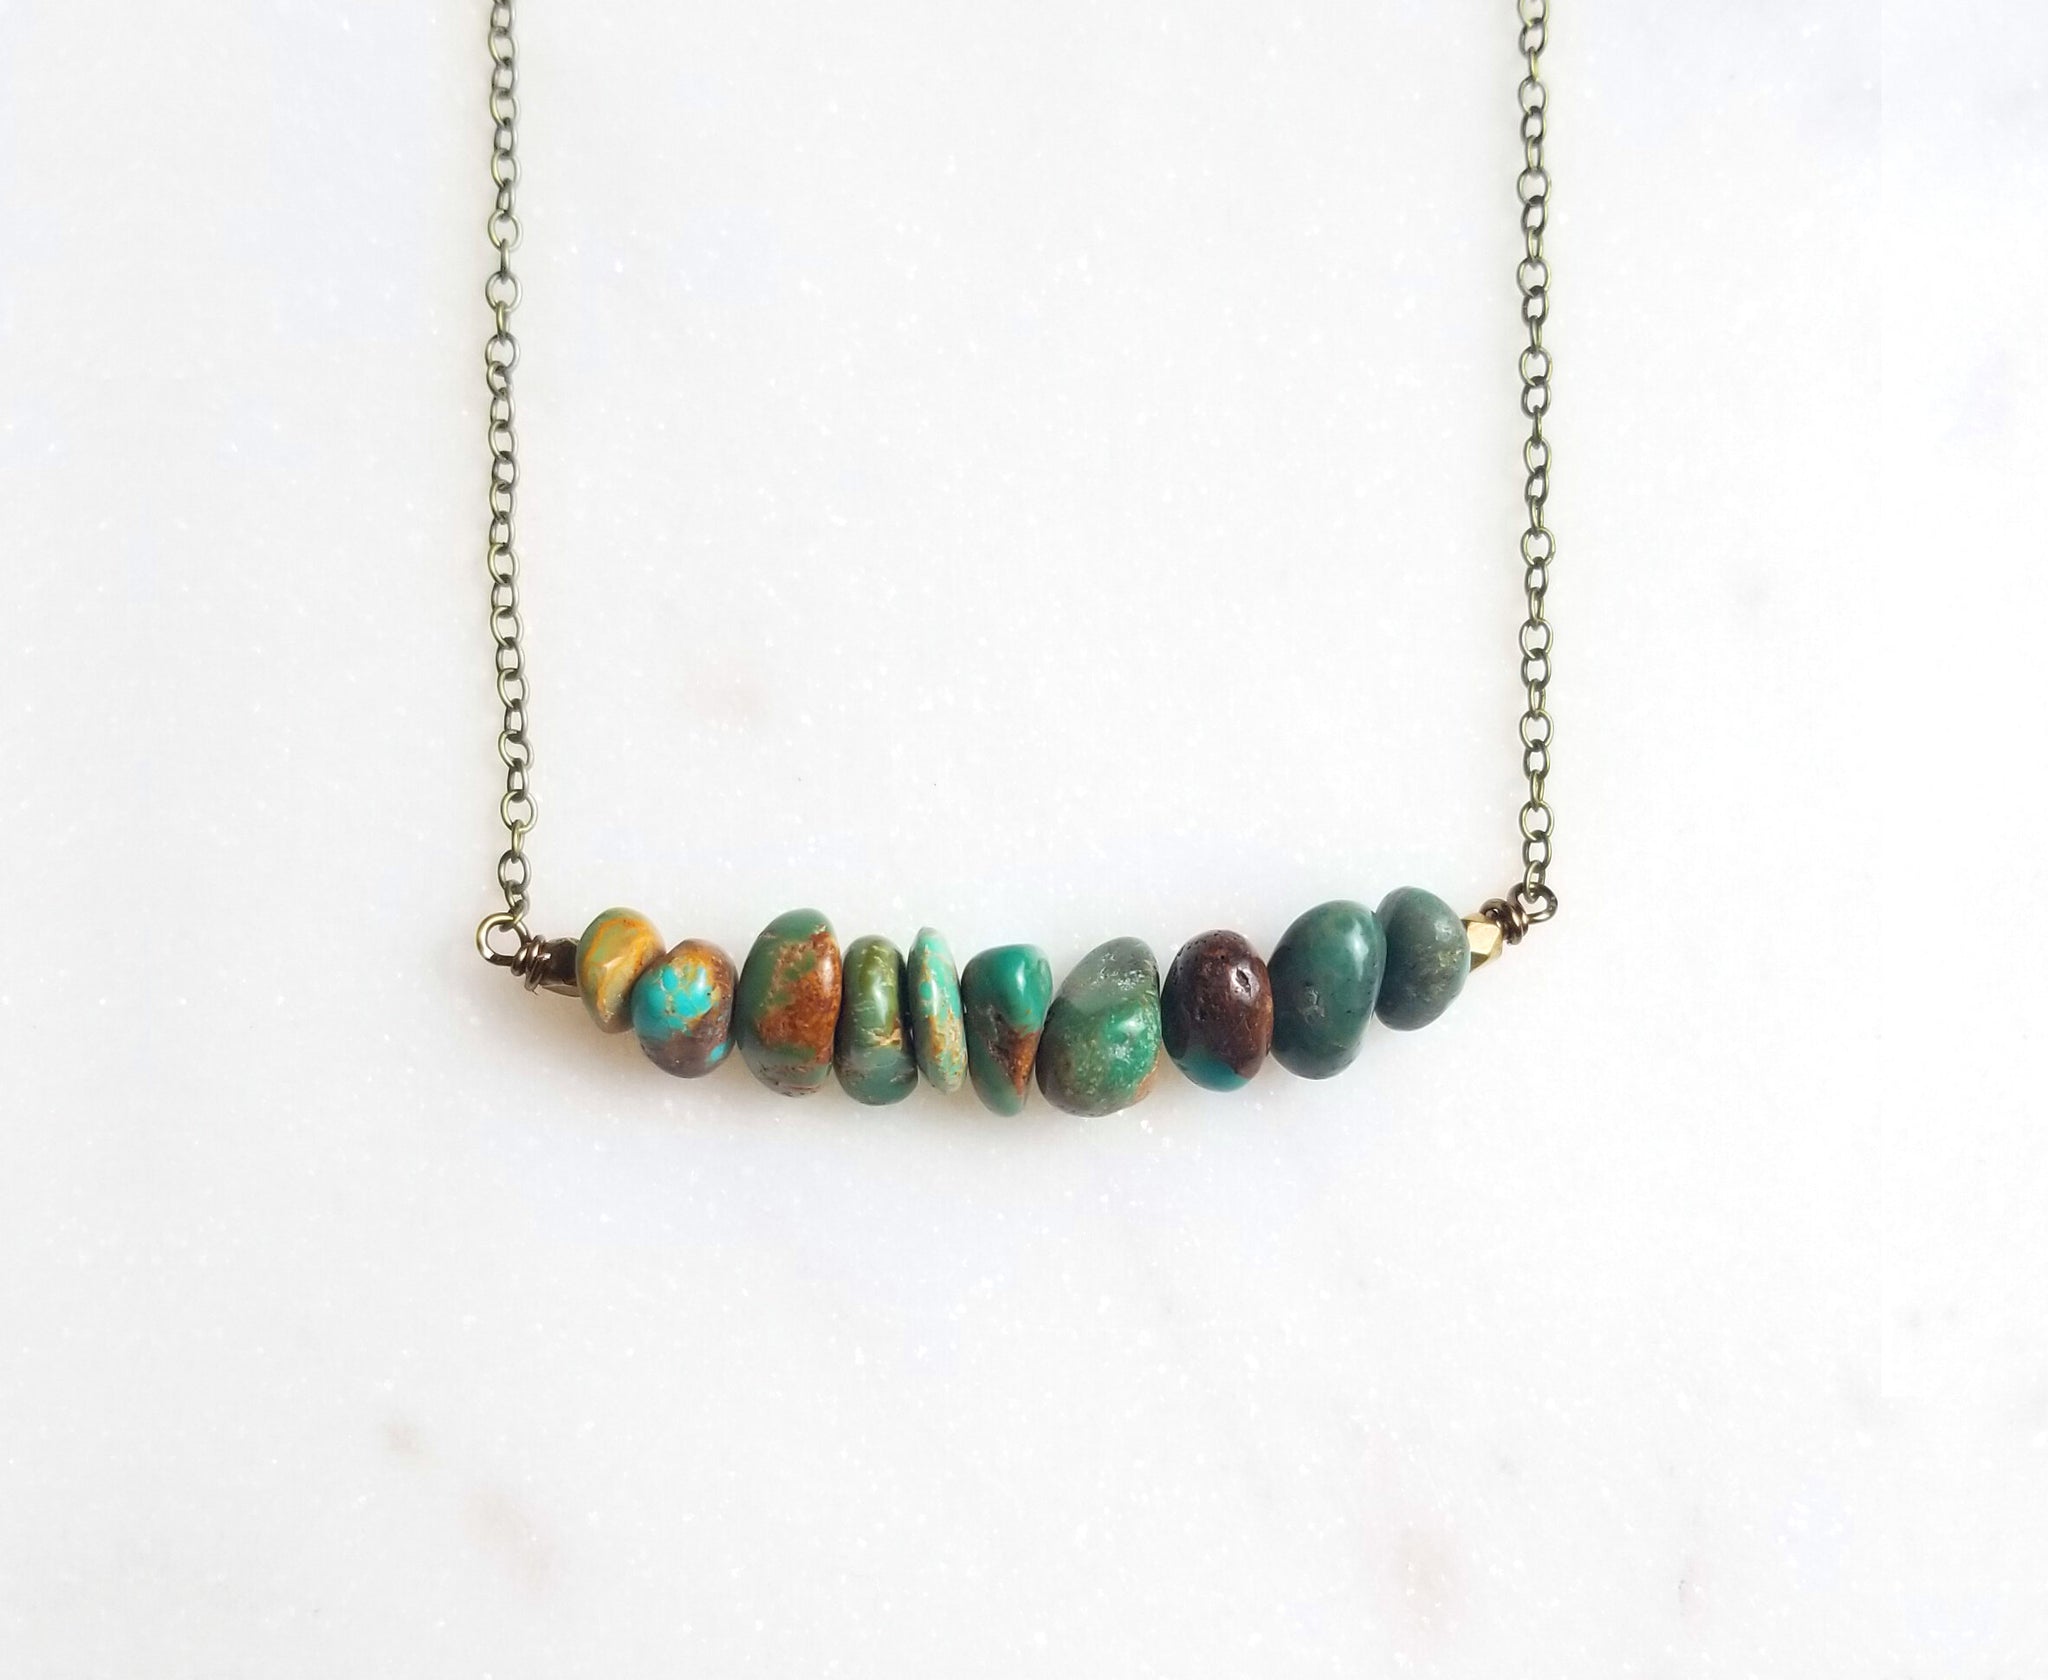 Genuine Turquoise Handmade Brass Necklace by Edgy Petal